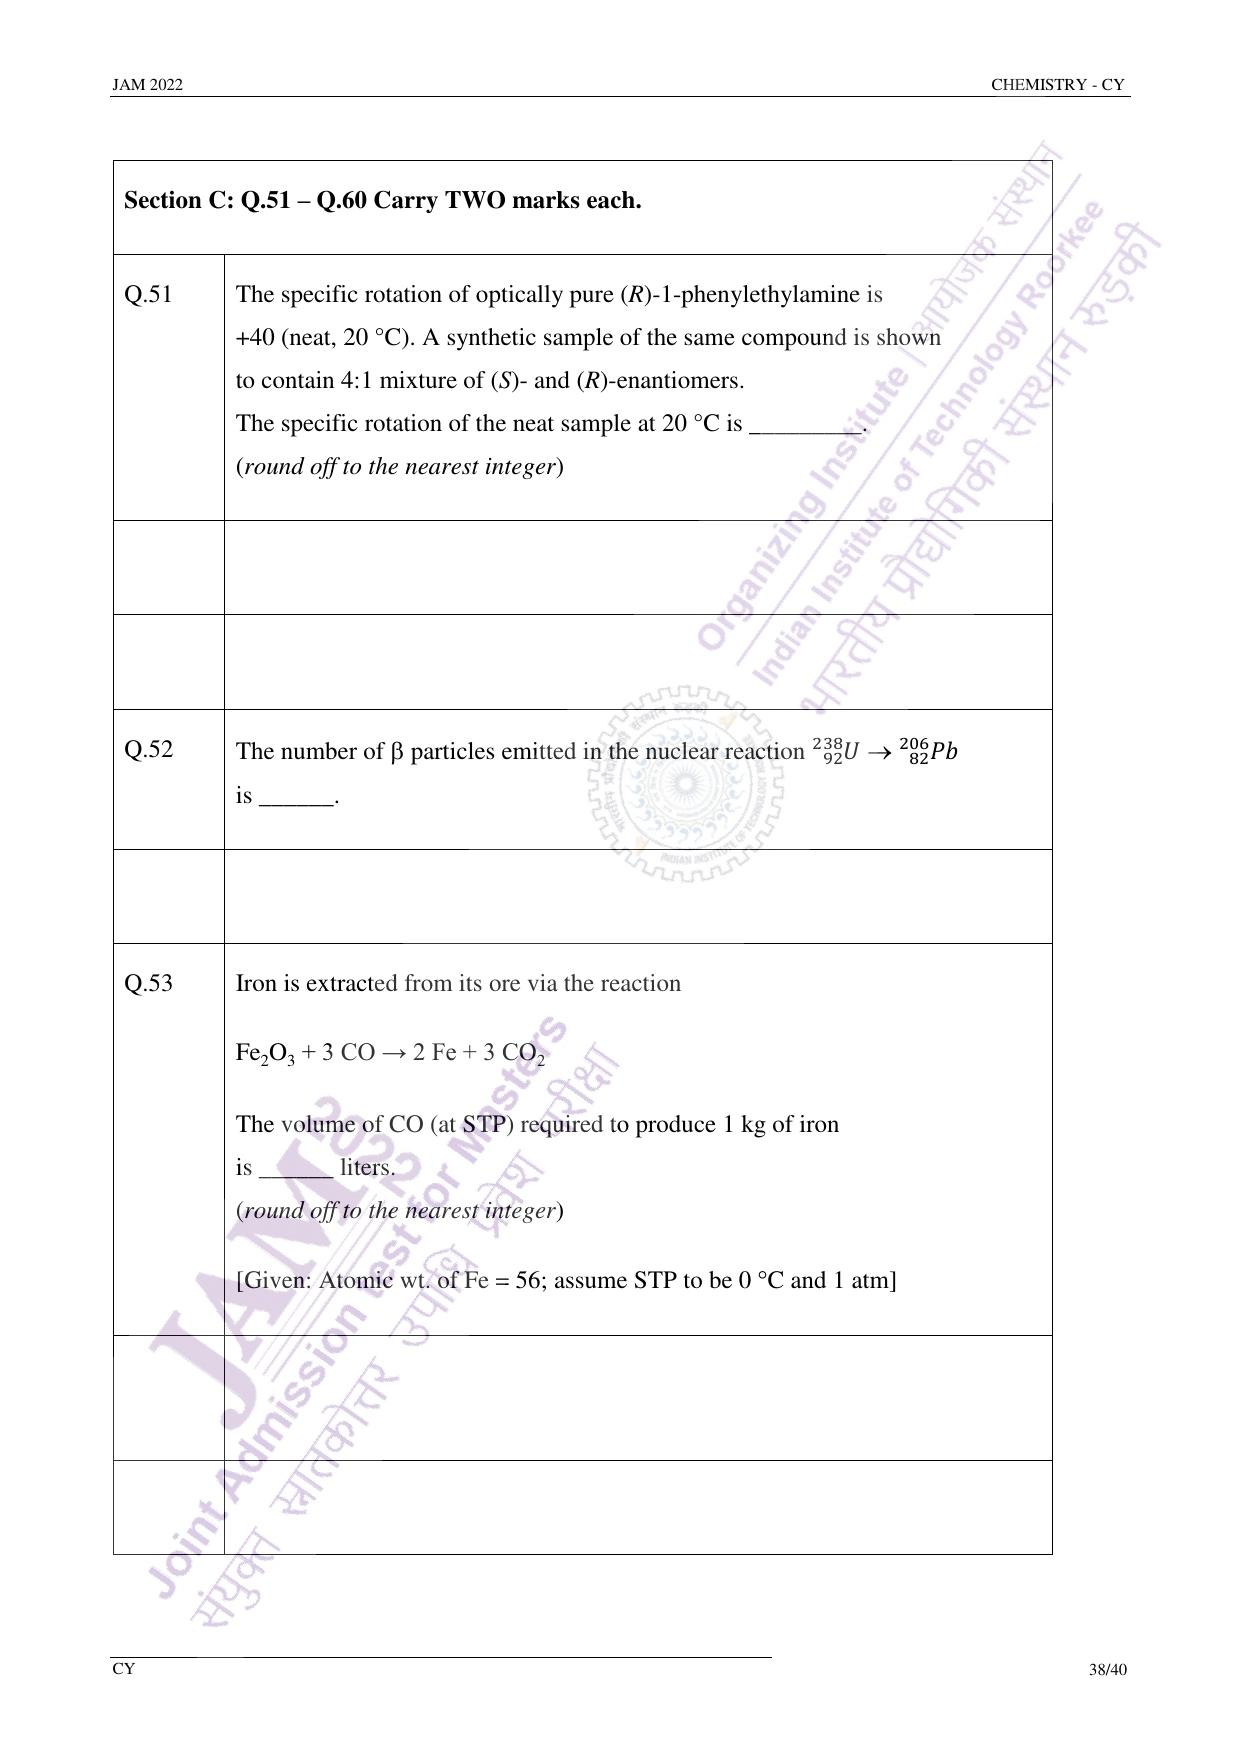 JAM 2022: CY Question Paper - Page 37